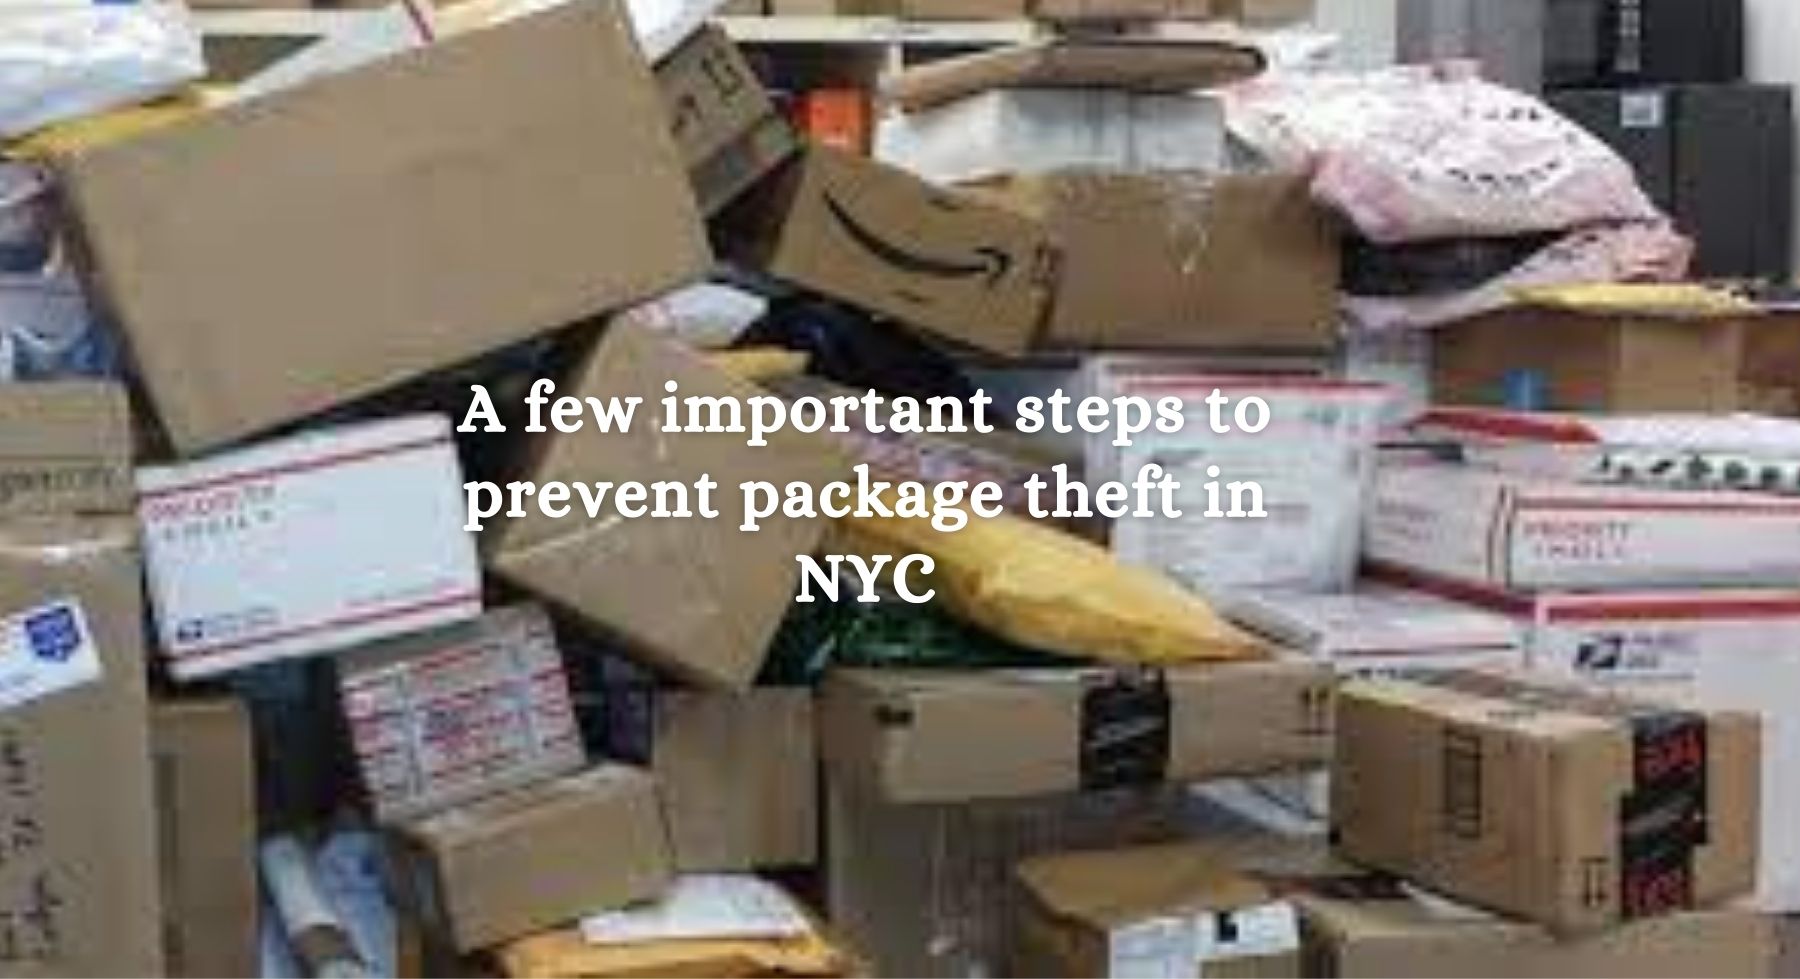 A few important steps to prevent package theft in NYC